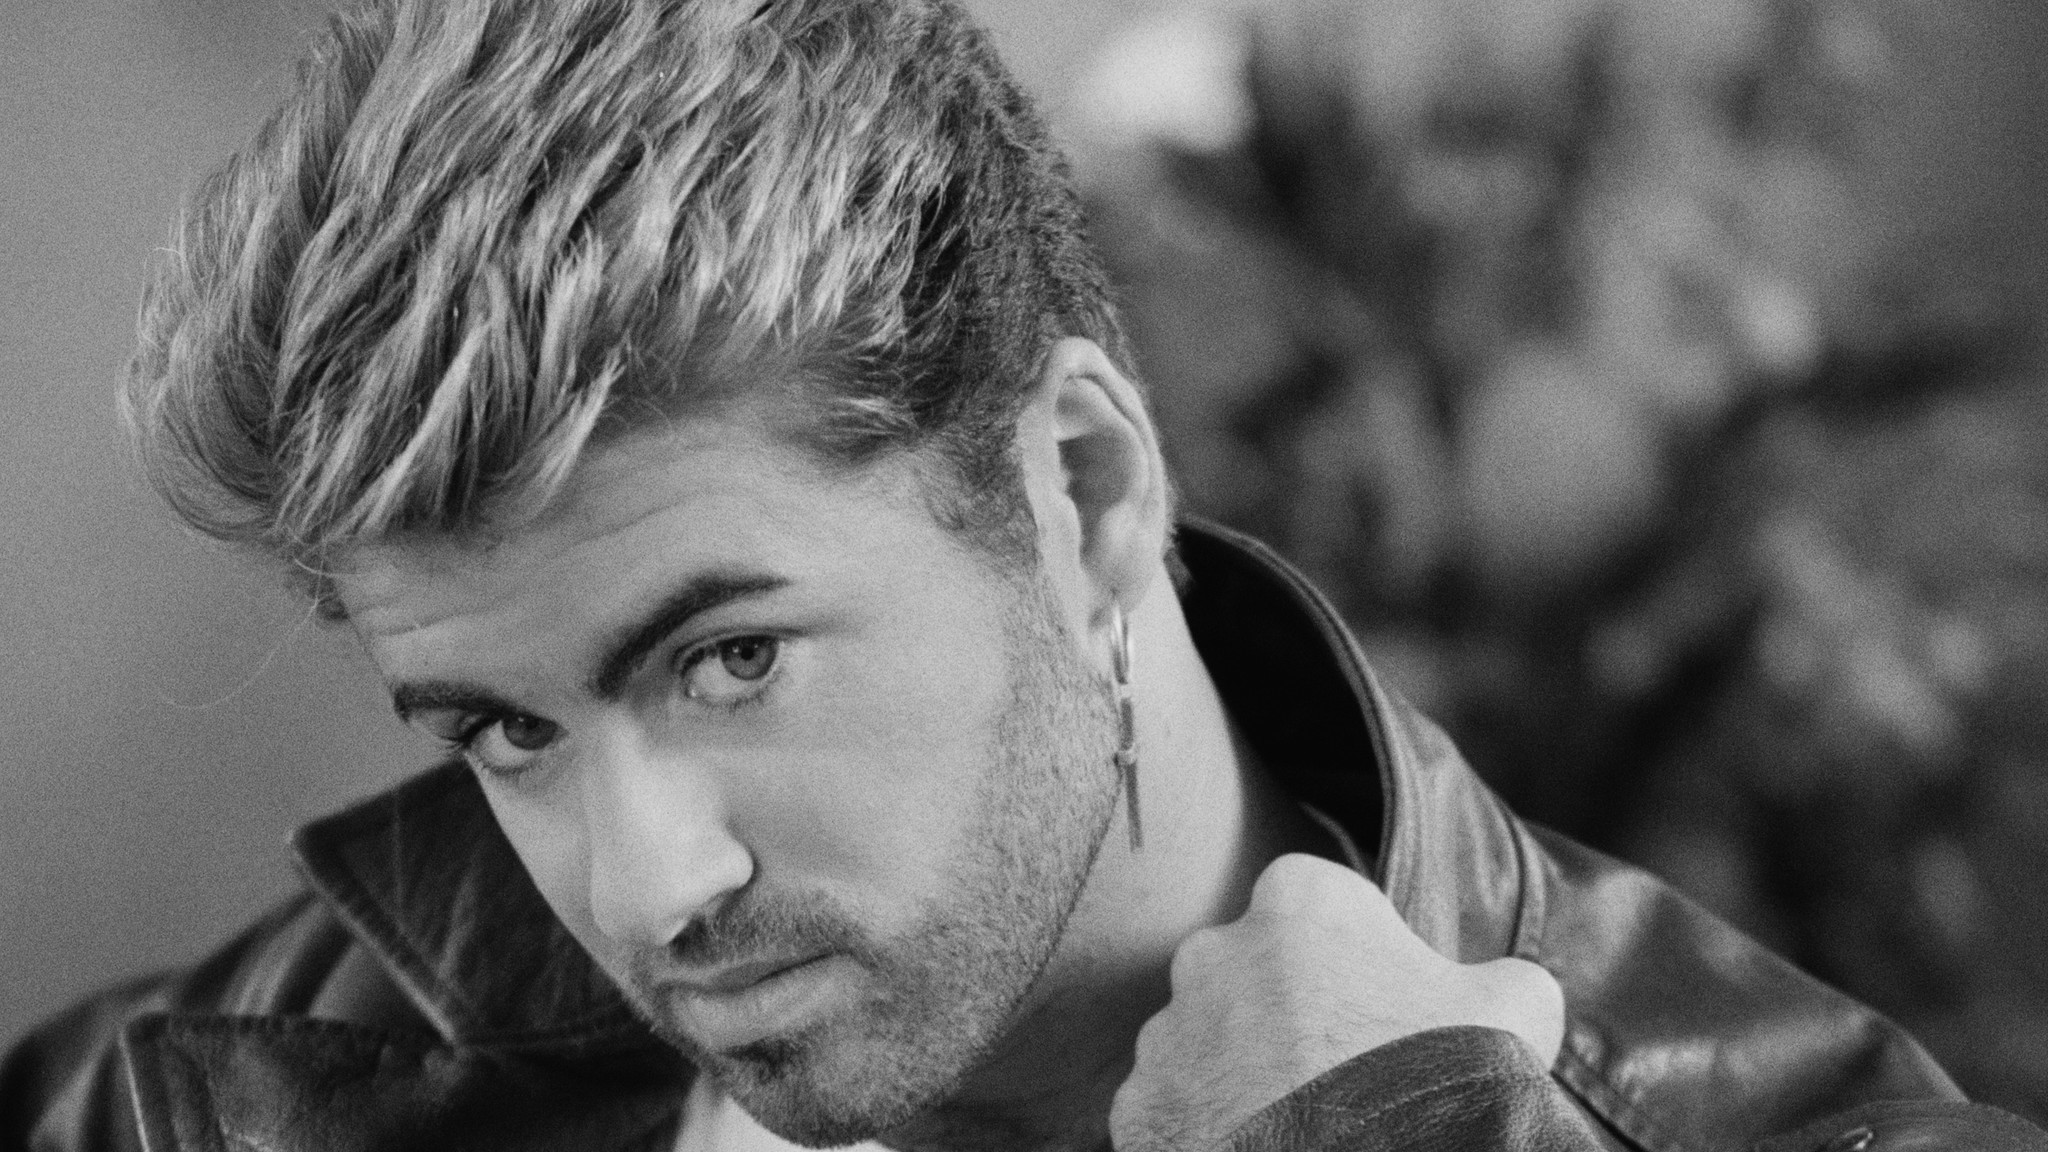 george-michael-always-knew-he-was-a-serious-artist-then-he-went-on-to